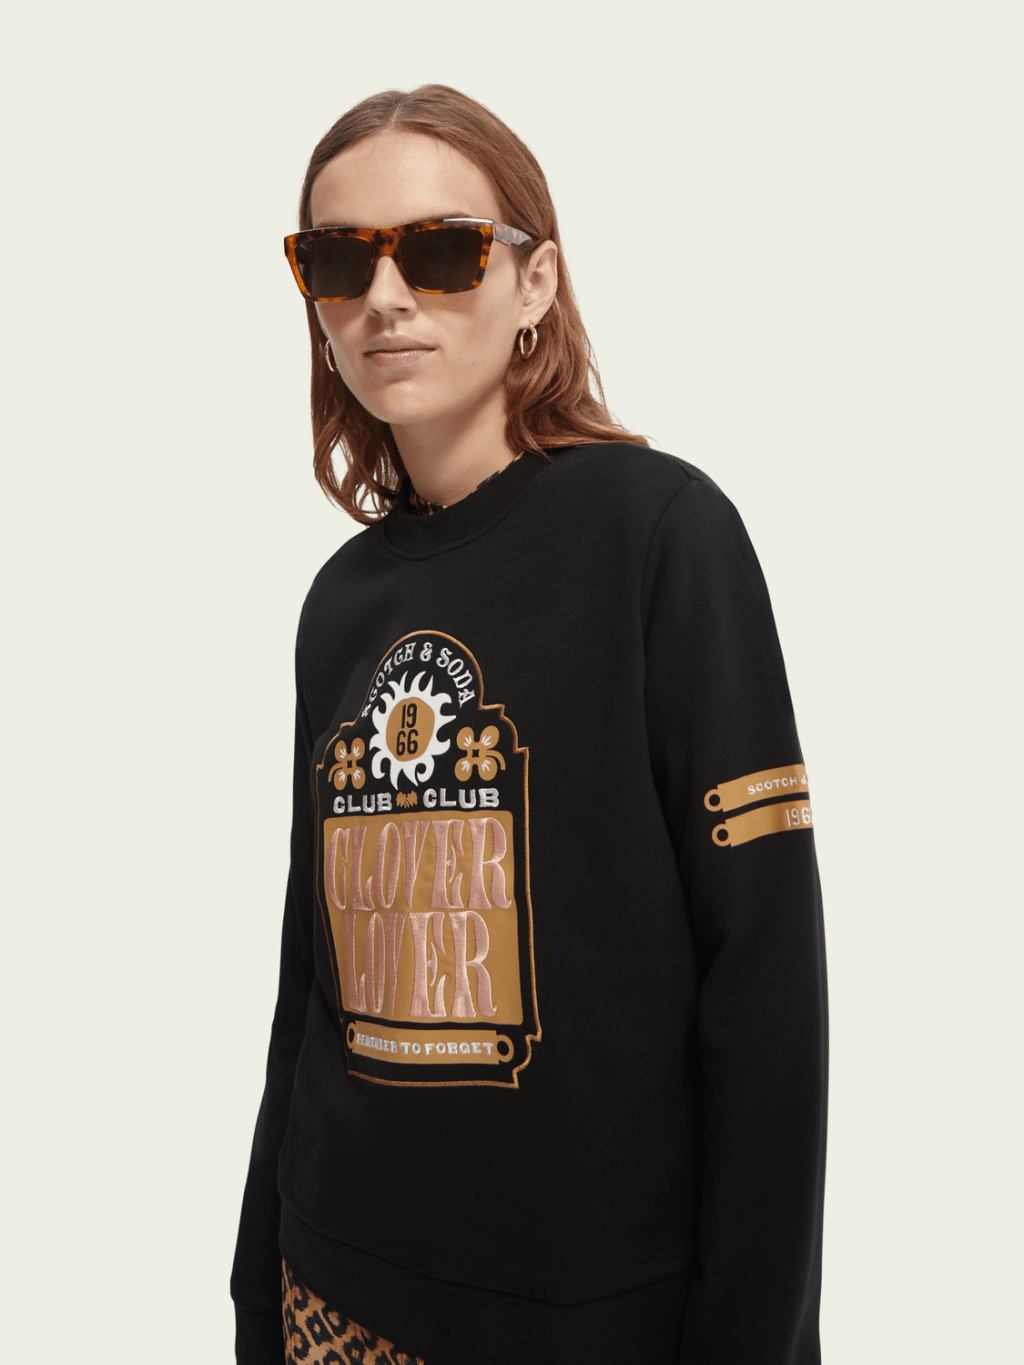 Long Sleeeved SCOTCH & SODA REGULAR FIT EMBROIDERED GRAPHIC SWEATSHIRT